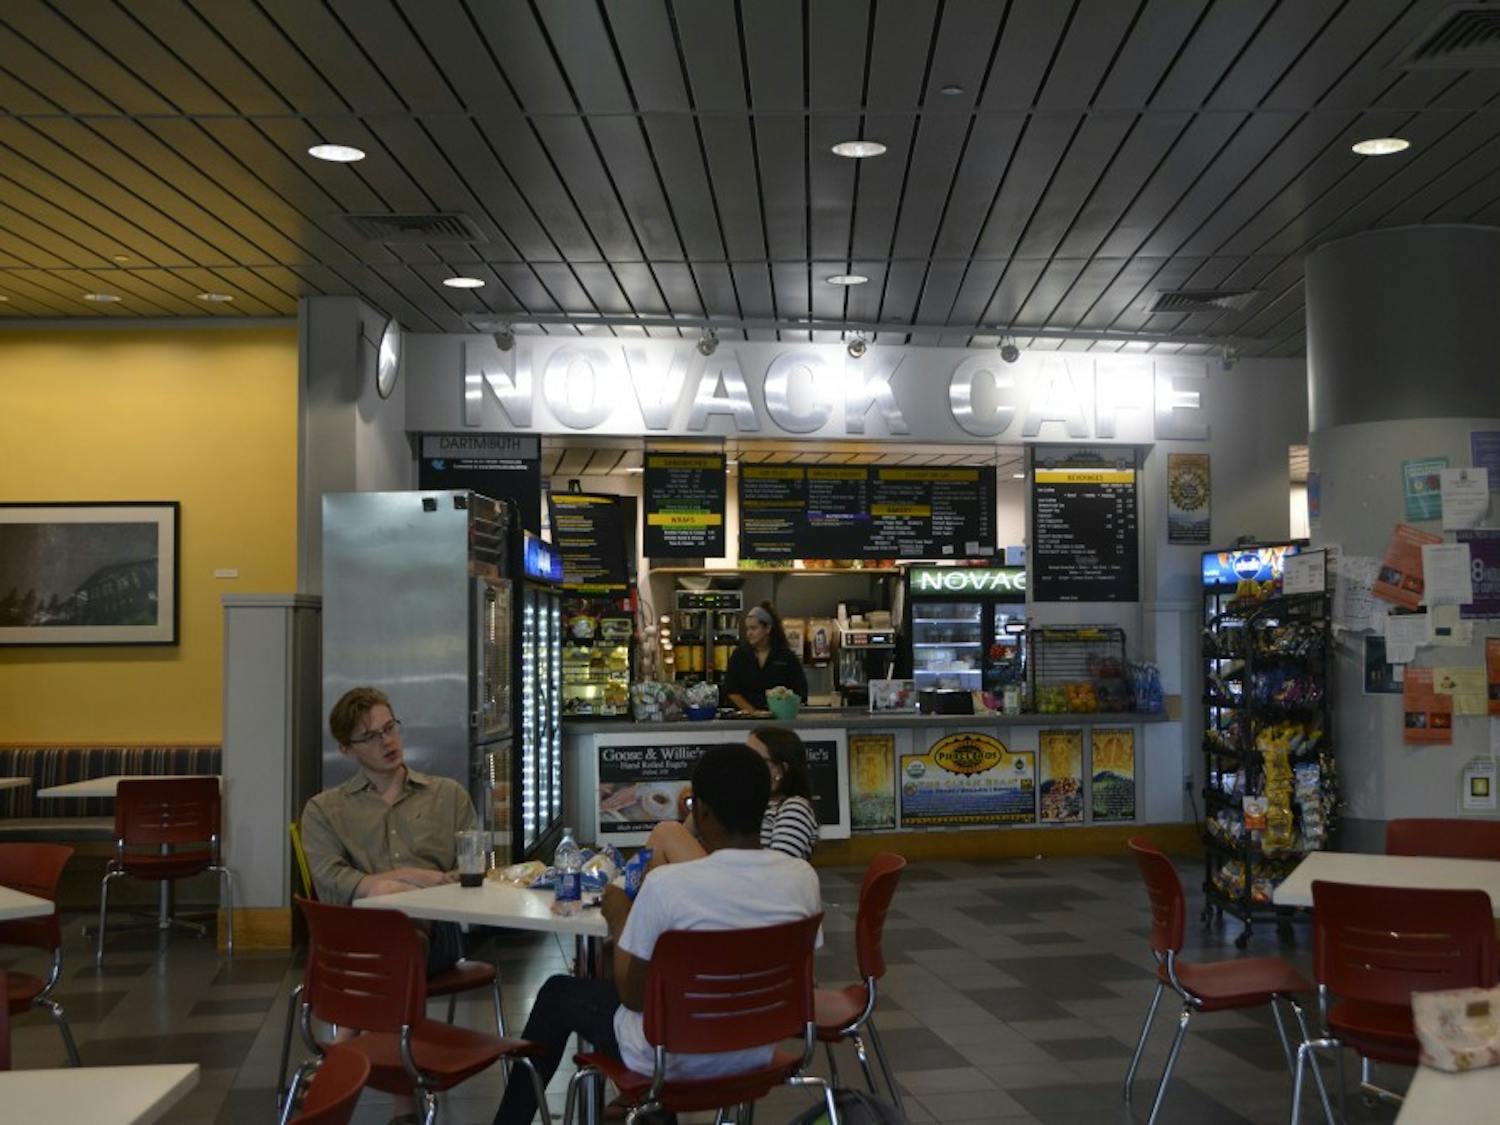 Novack Cafe has a variety of eating options for students who need to grab something between classes or on the go.